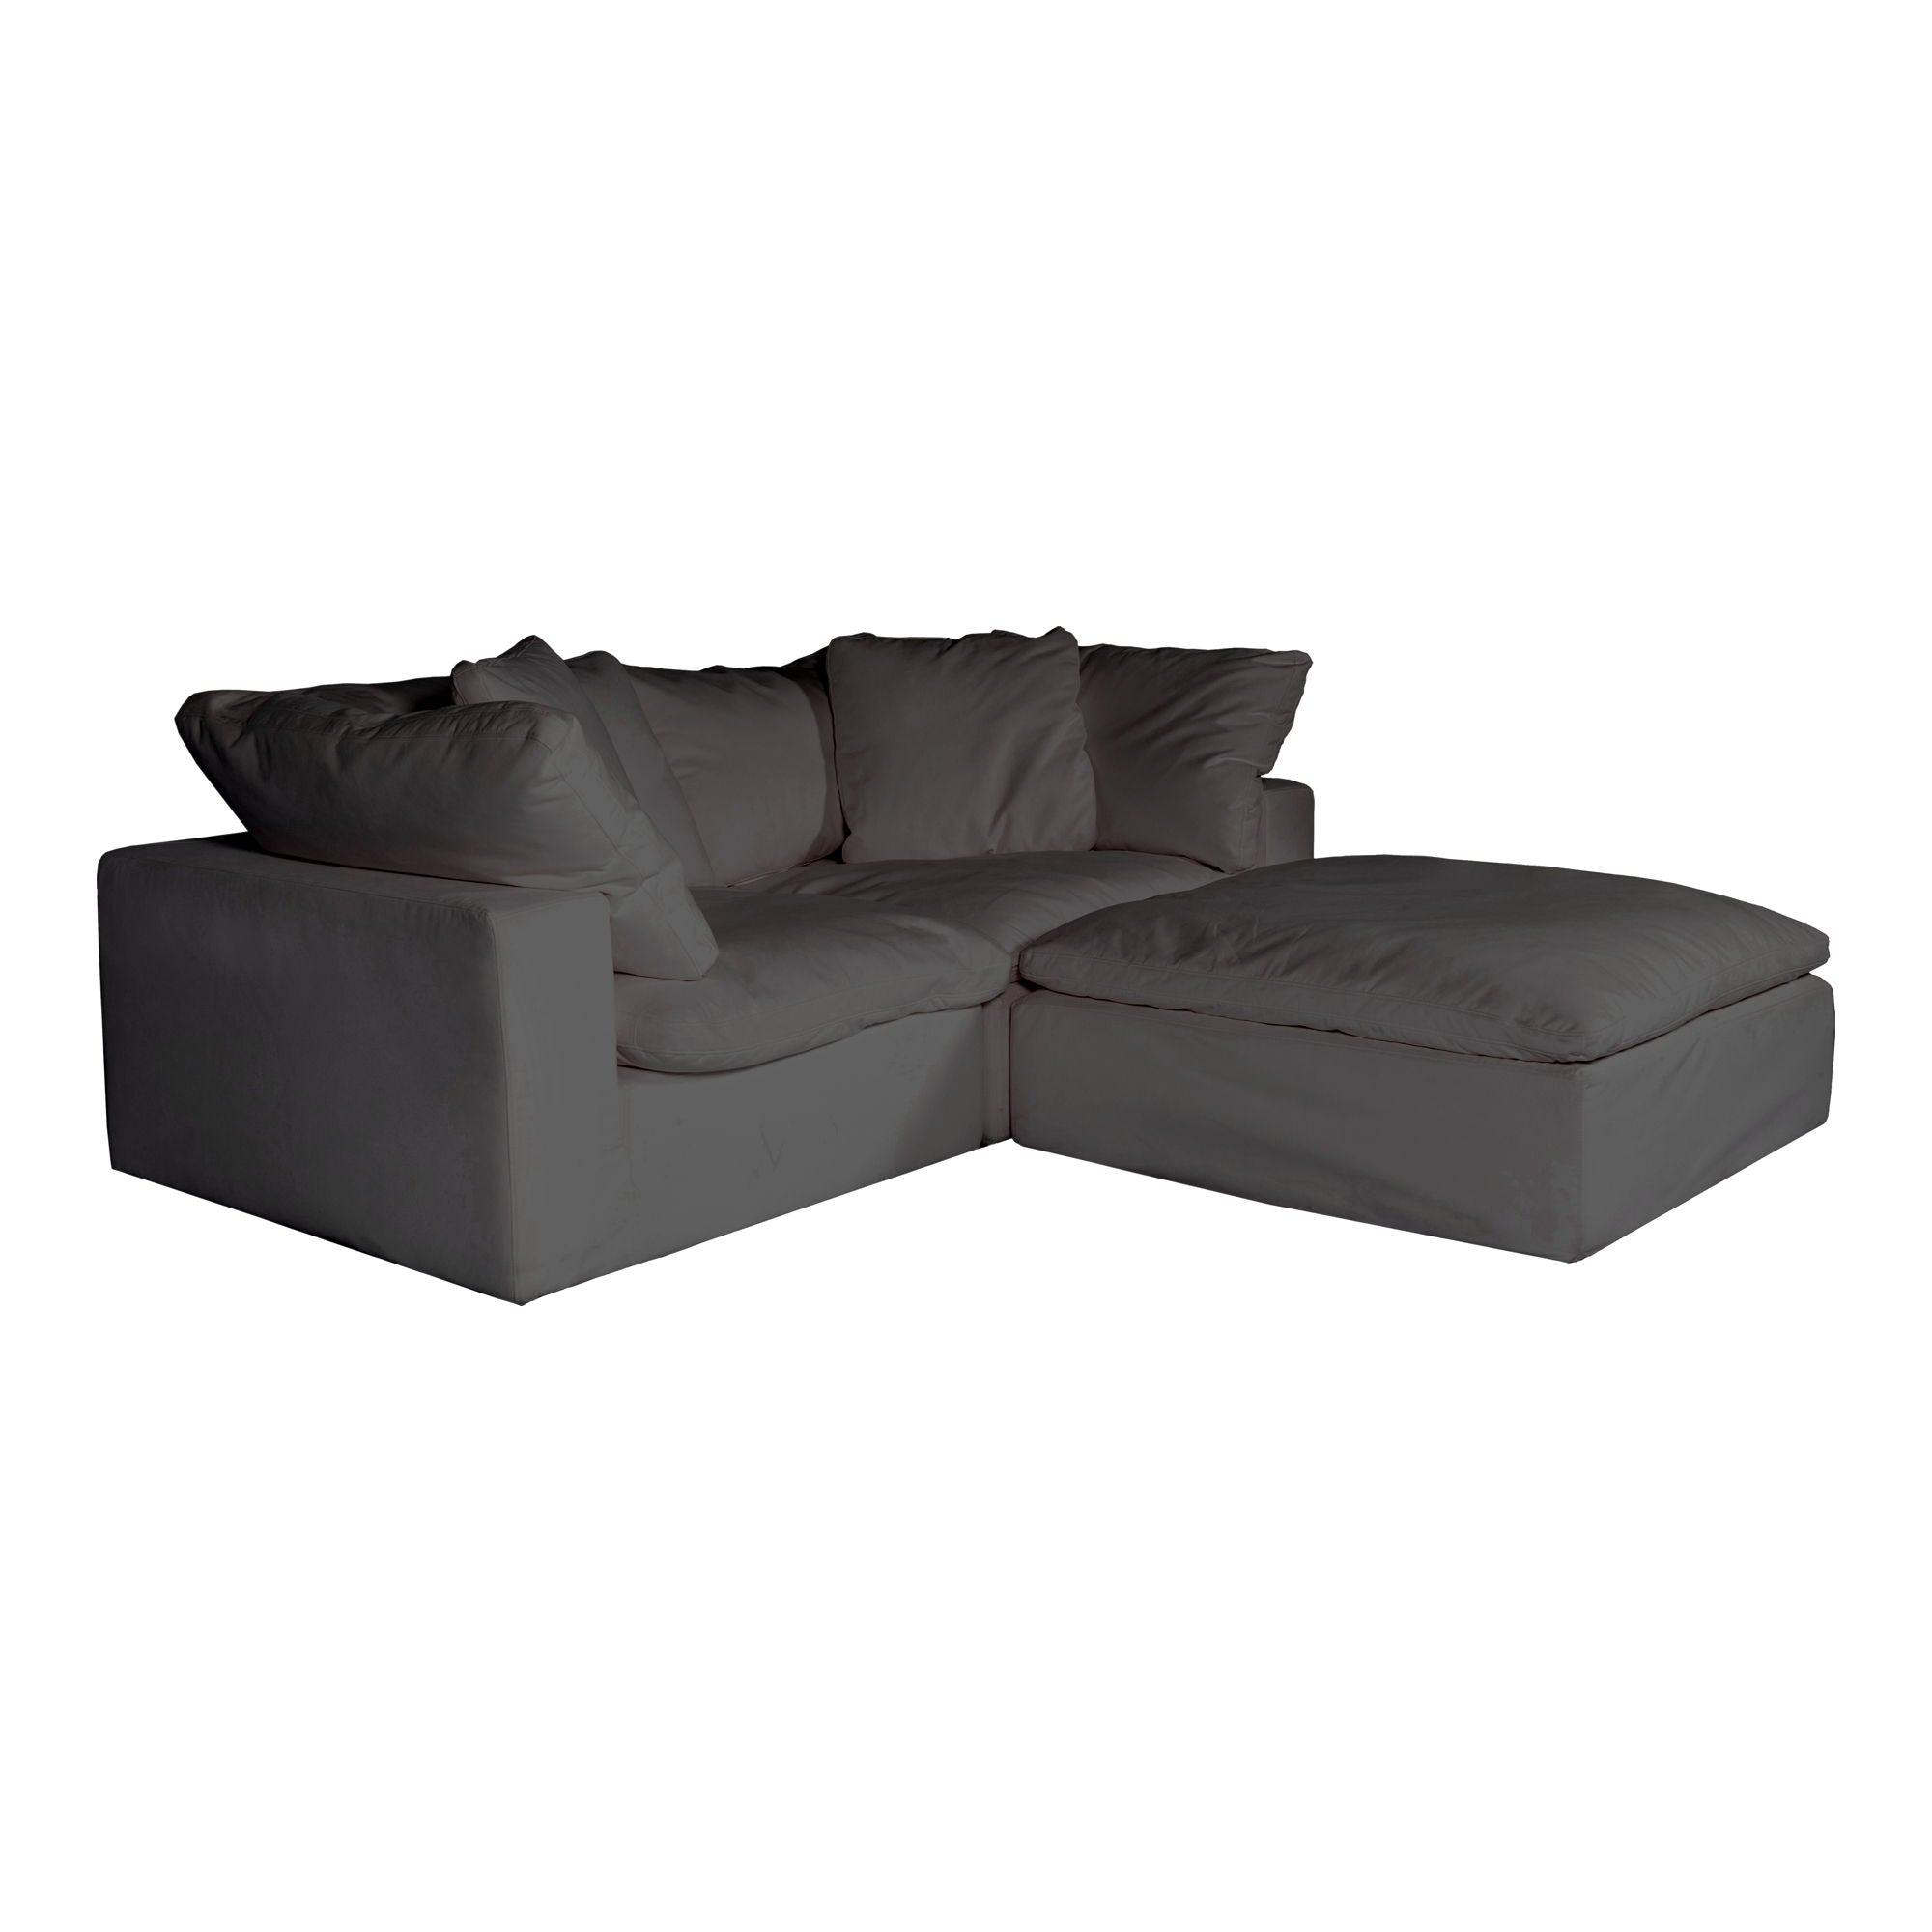 Clay - Nook Modular Sectional Livesmart Fabric - Light Gray-Stationary Sectionals-American Furniture Outlet